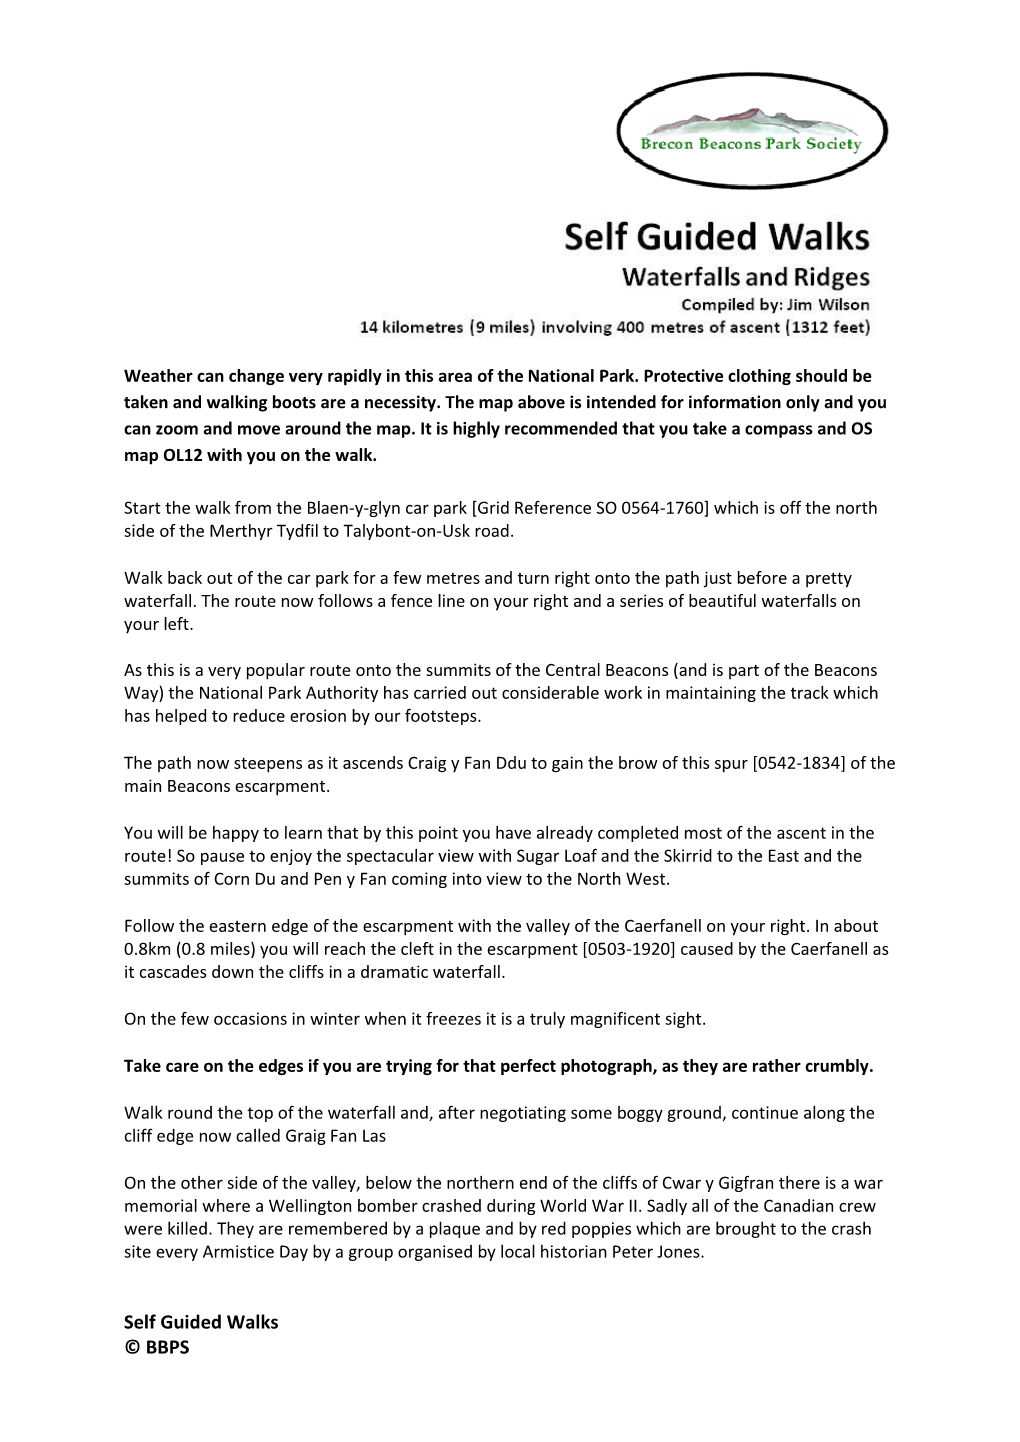 Self Guided Walks © BBPS